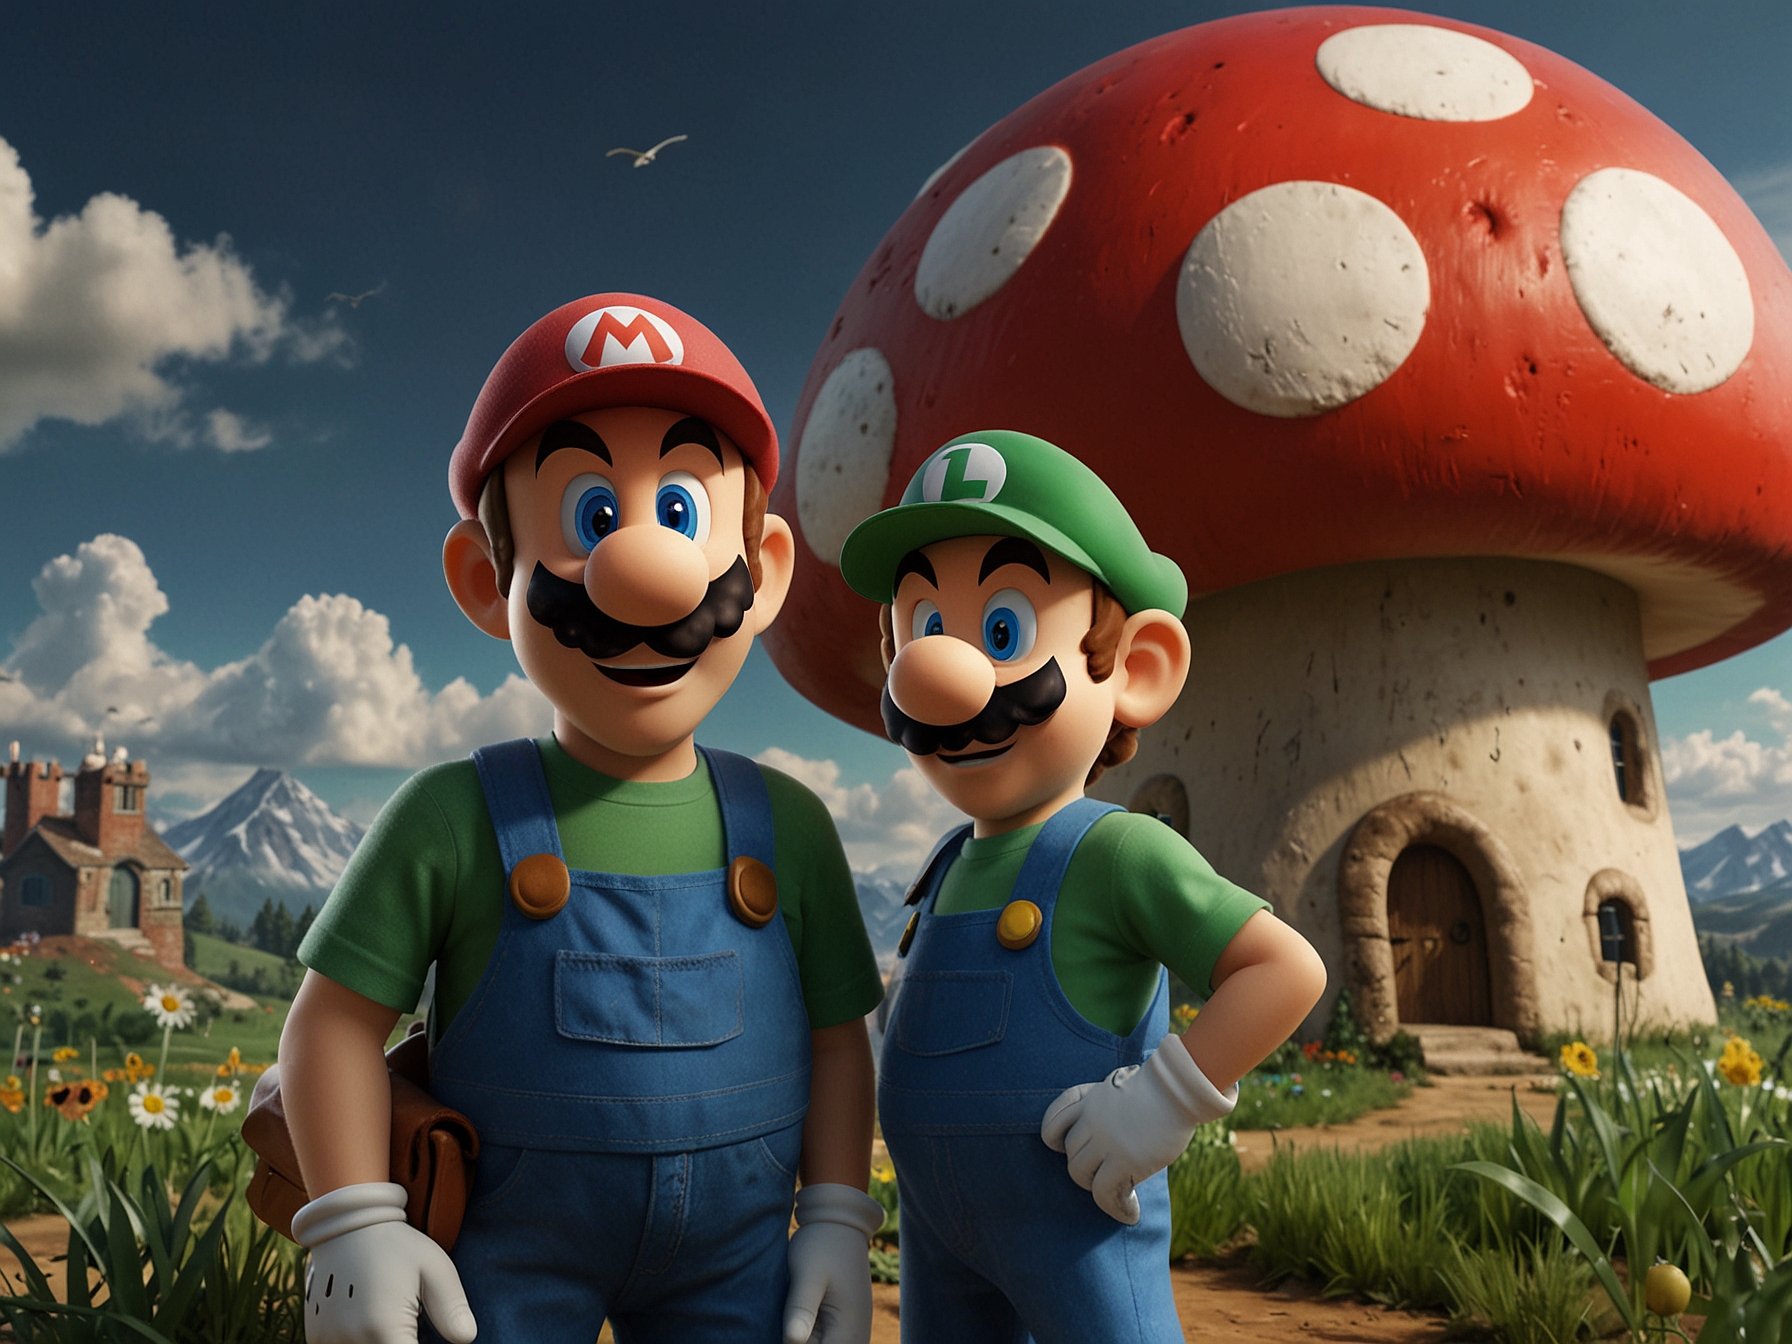 A teaser poster showcasing Mario and Luigi standing in front of the Mushroom Kingdom, hinting at their upcoming cinematic adventure, with a release date of April 24, 2026, displayed prominently.